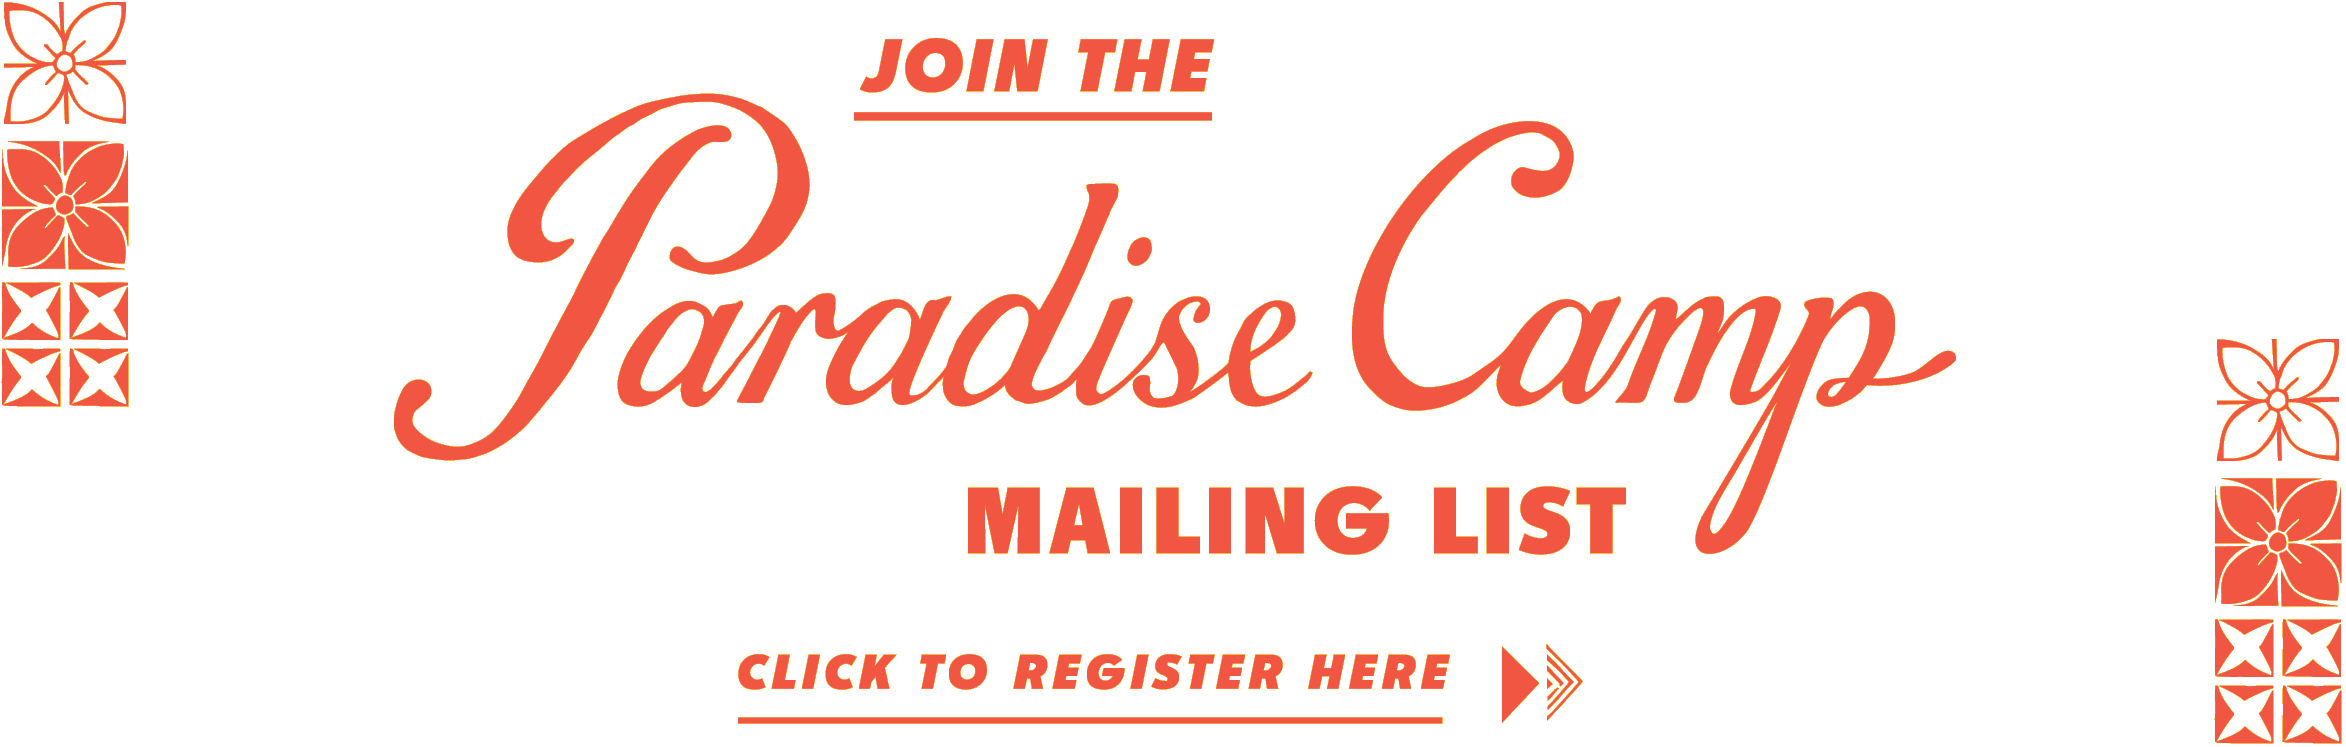 Join the Paradise Camp Mailing List. Click here to register.